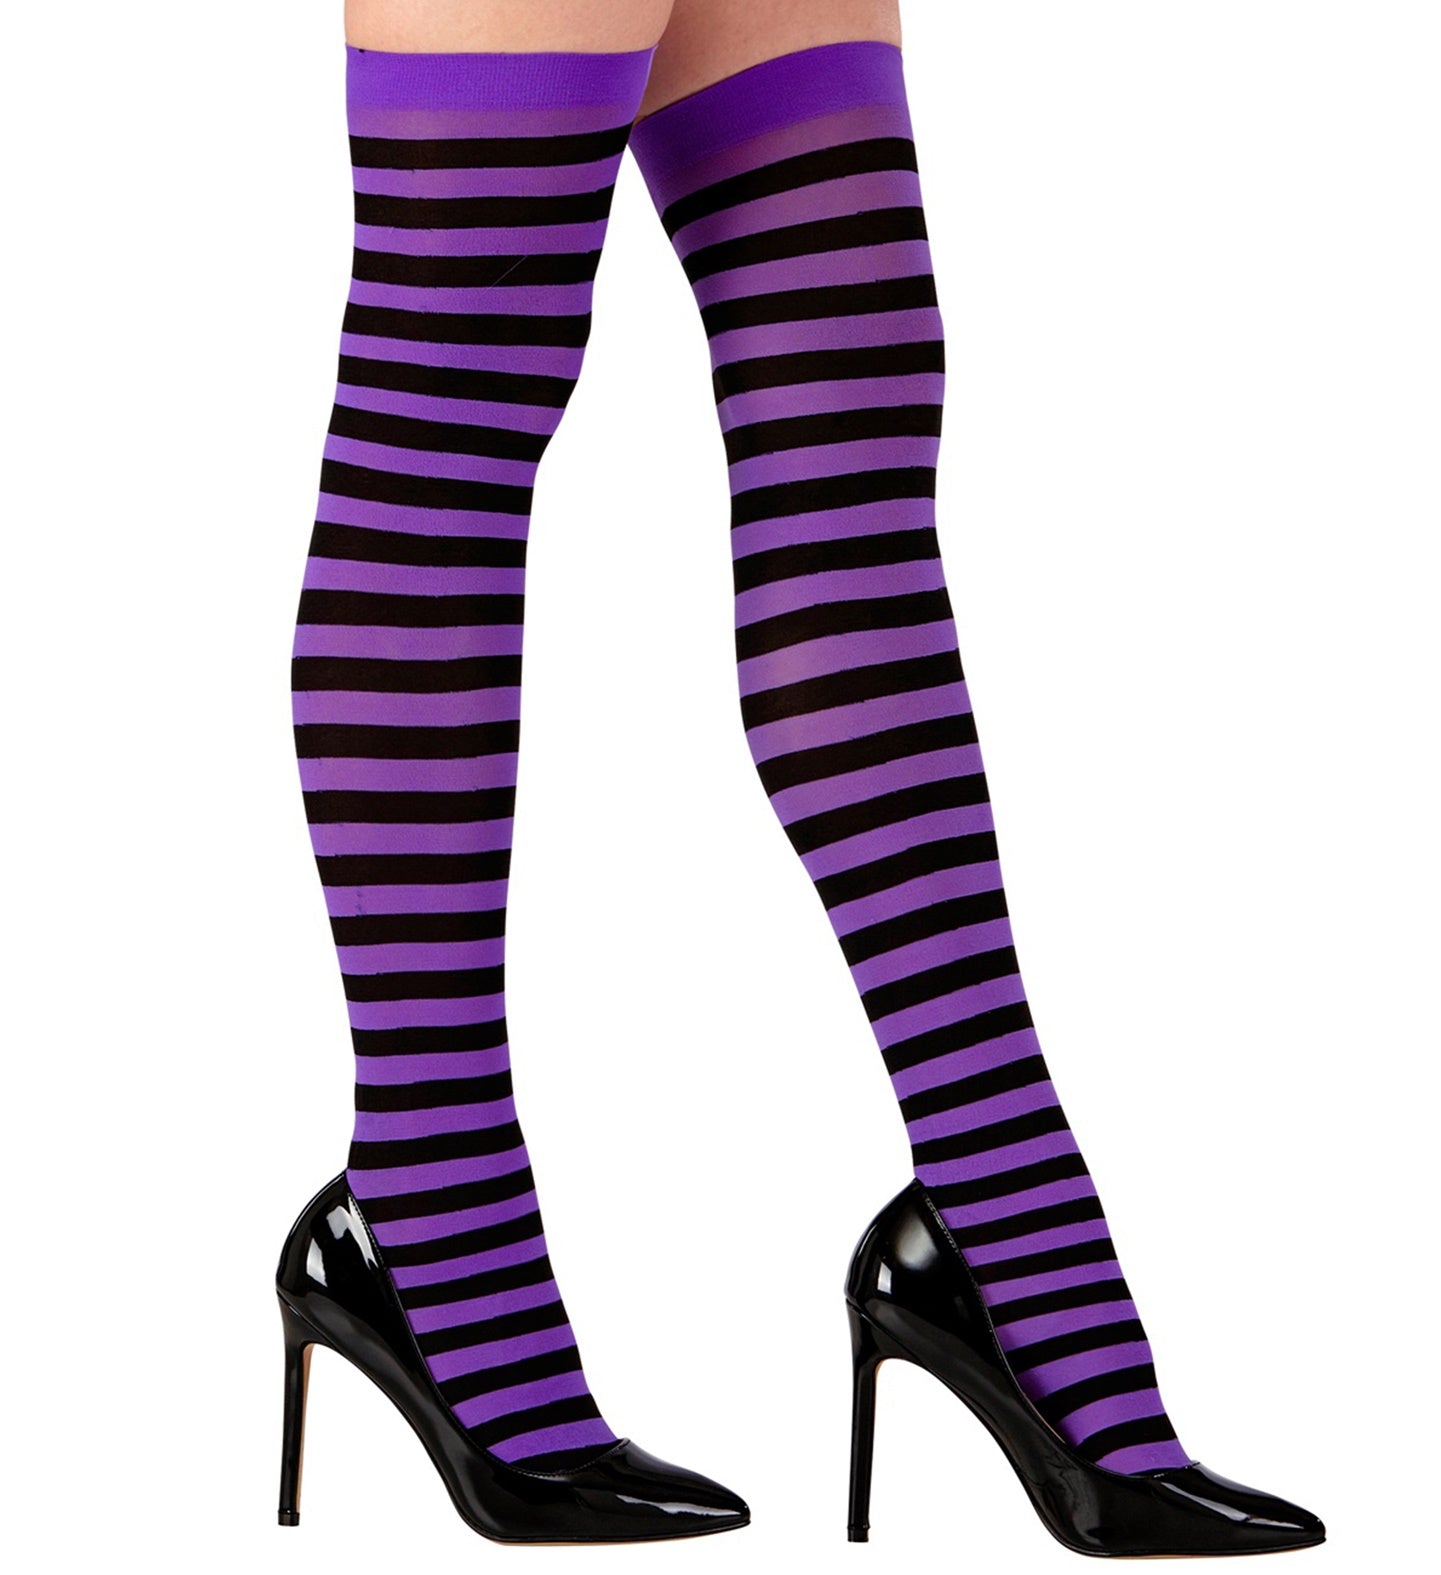 Purple and Black Striped thigh high stockings